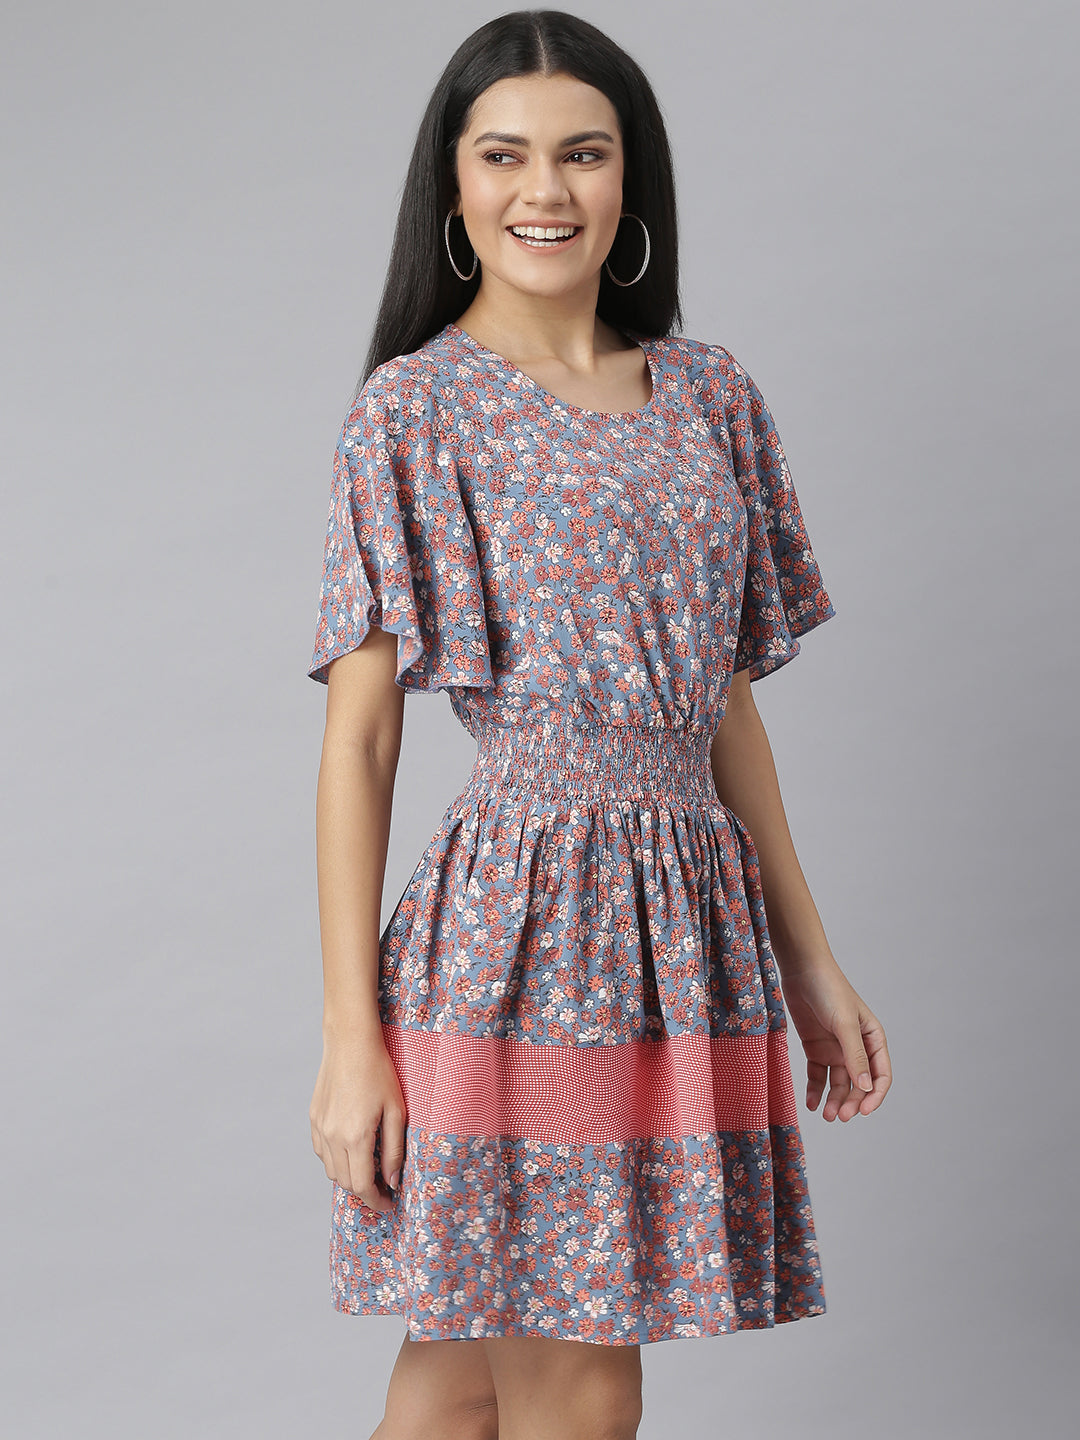 Women's Floral Printed Fit and Flare Dress